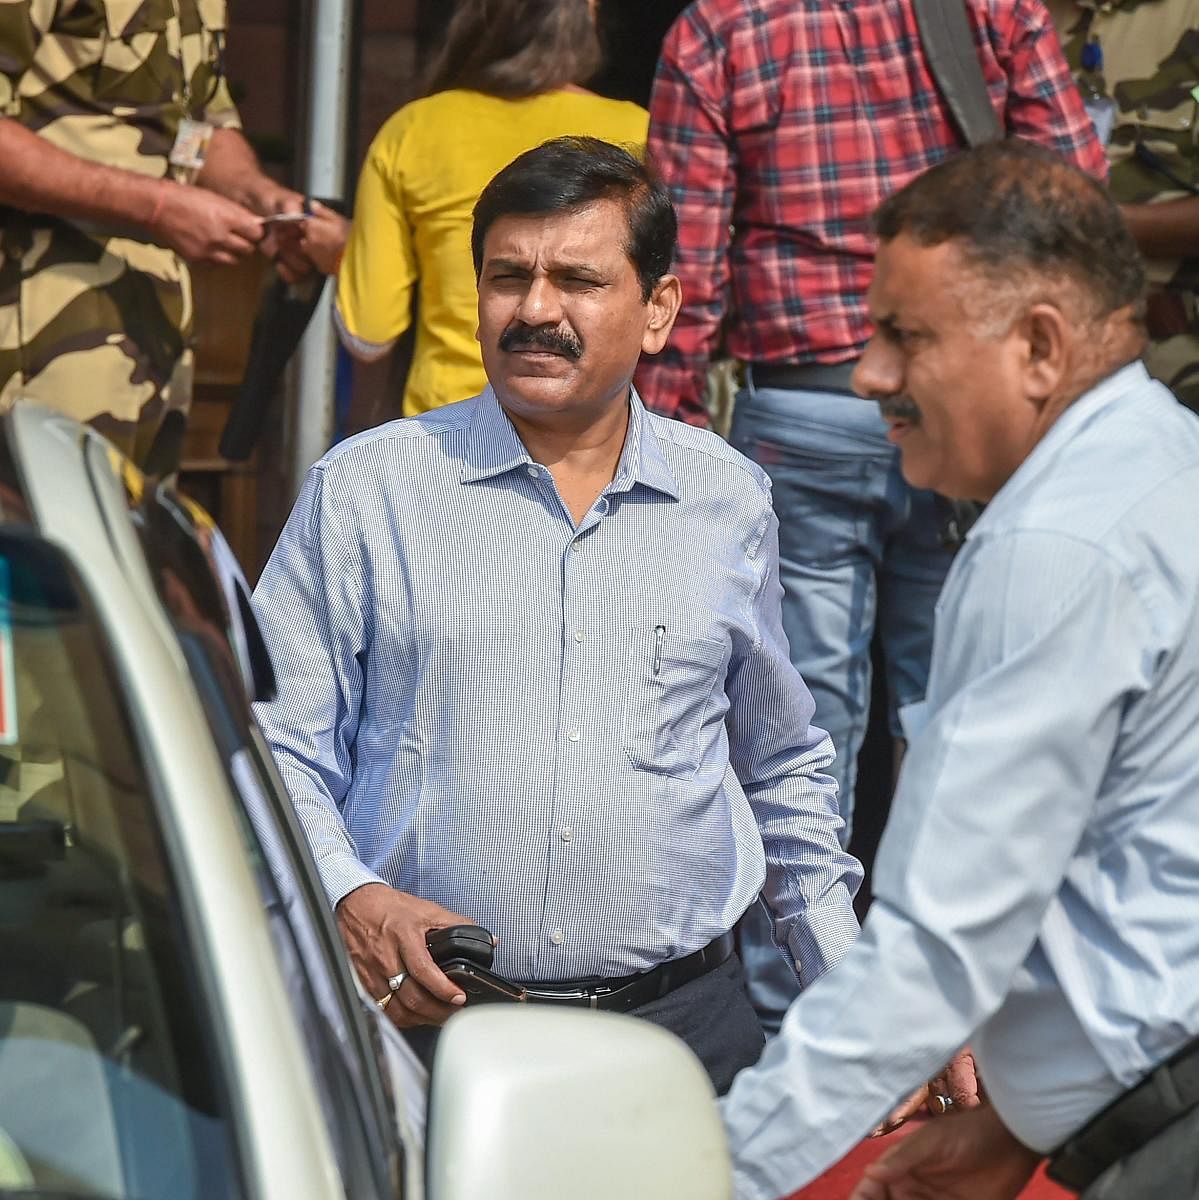 Interim director of the CBI M Nageswara Rao seen at Home Minister's office, in New Delhi, Thursday, Oct 25, 2018. The 1986 batch Odisha cadre IPS officer Rao, has been made interim director of the Central Bureau of Investigation (CBI) and is known for his